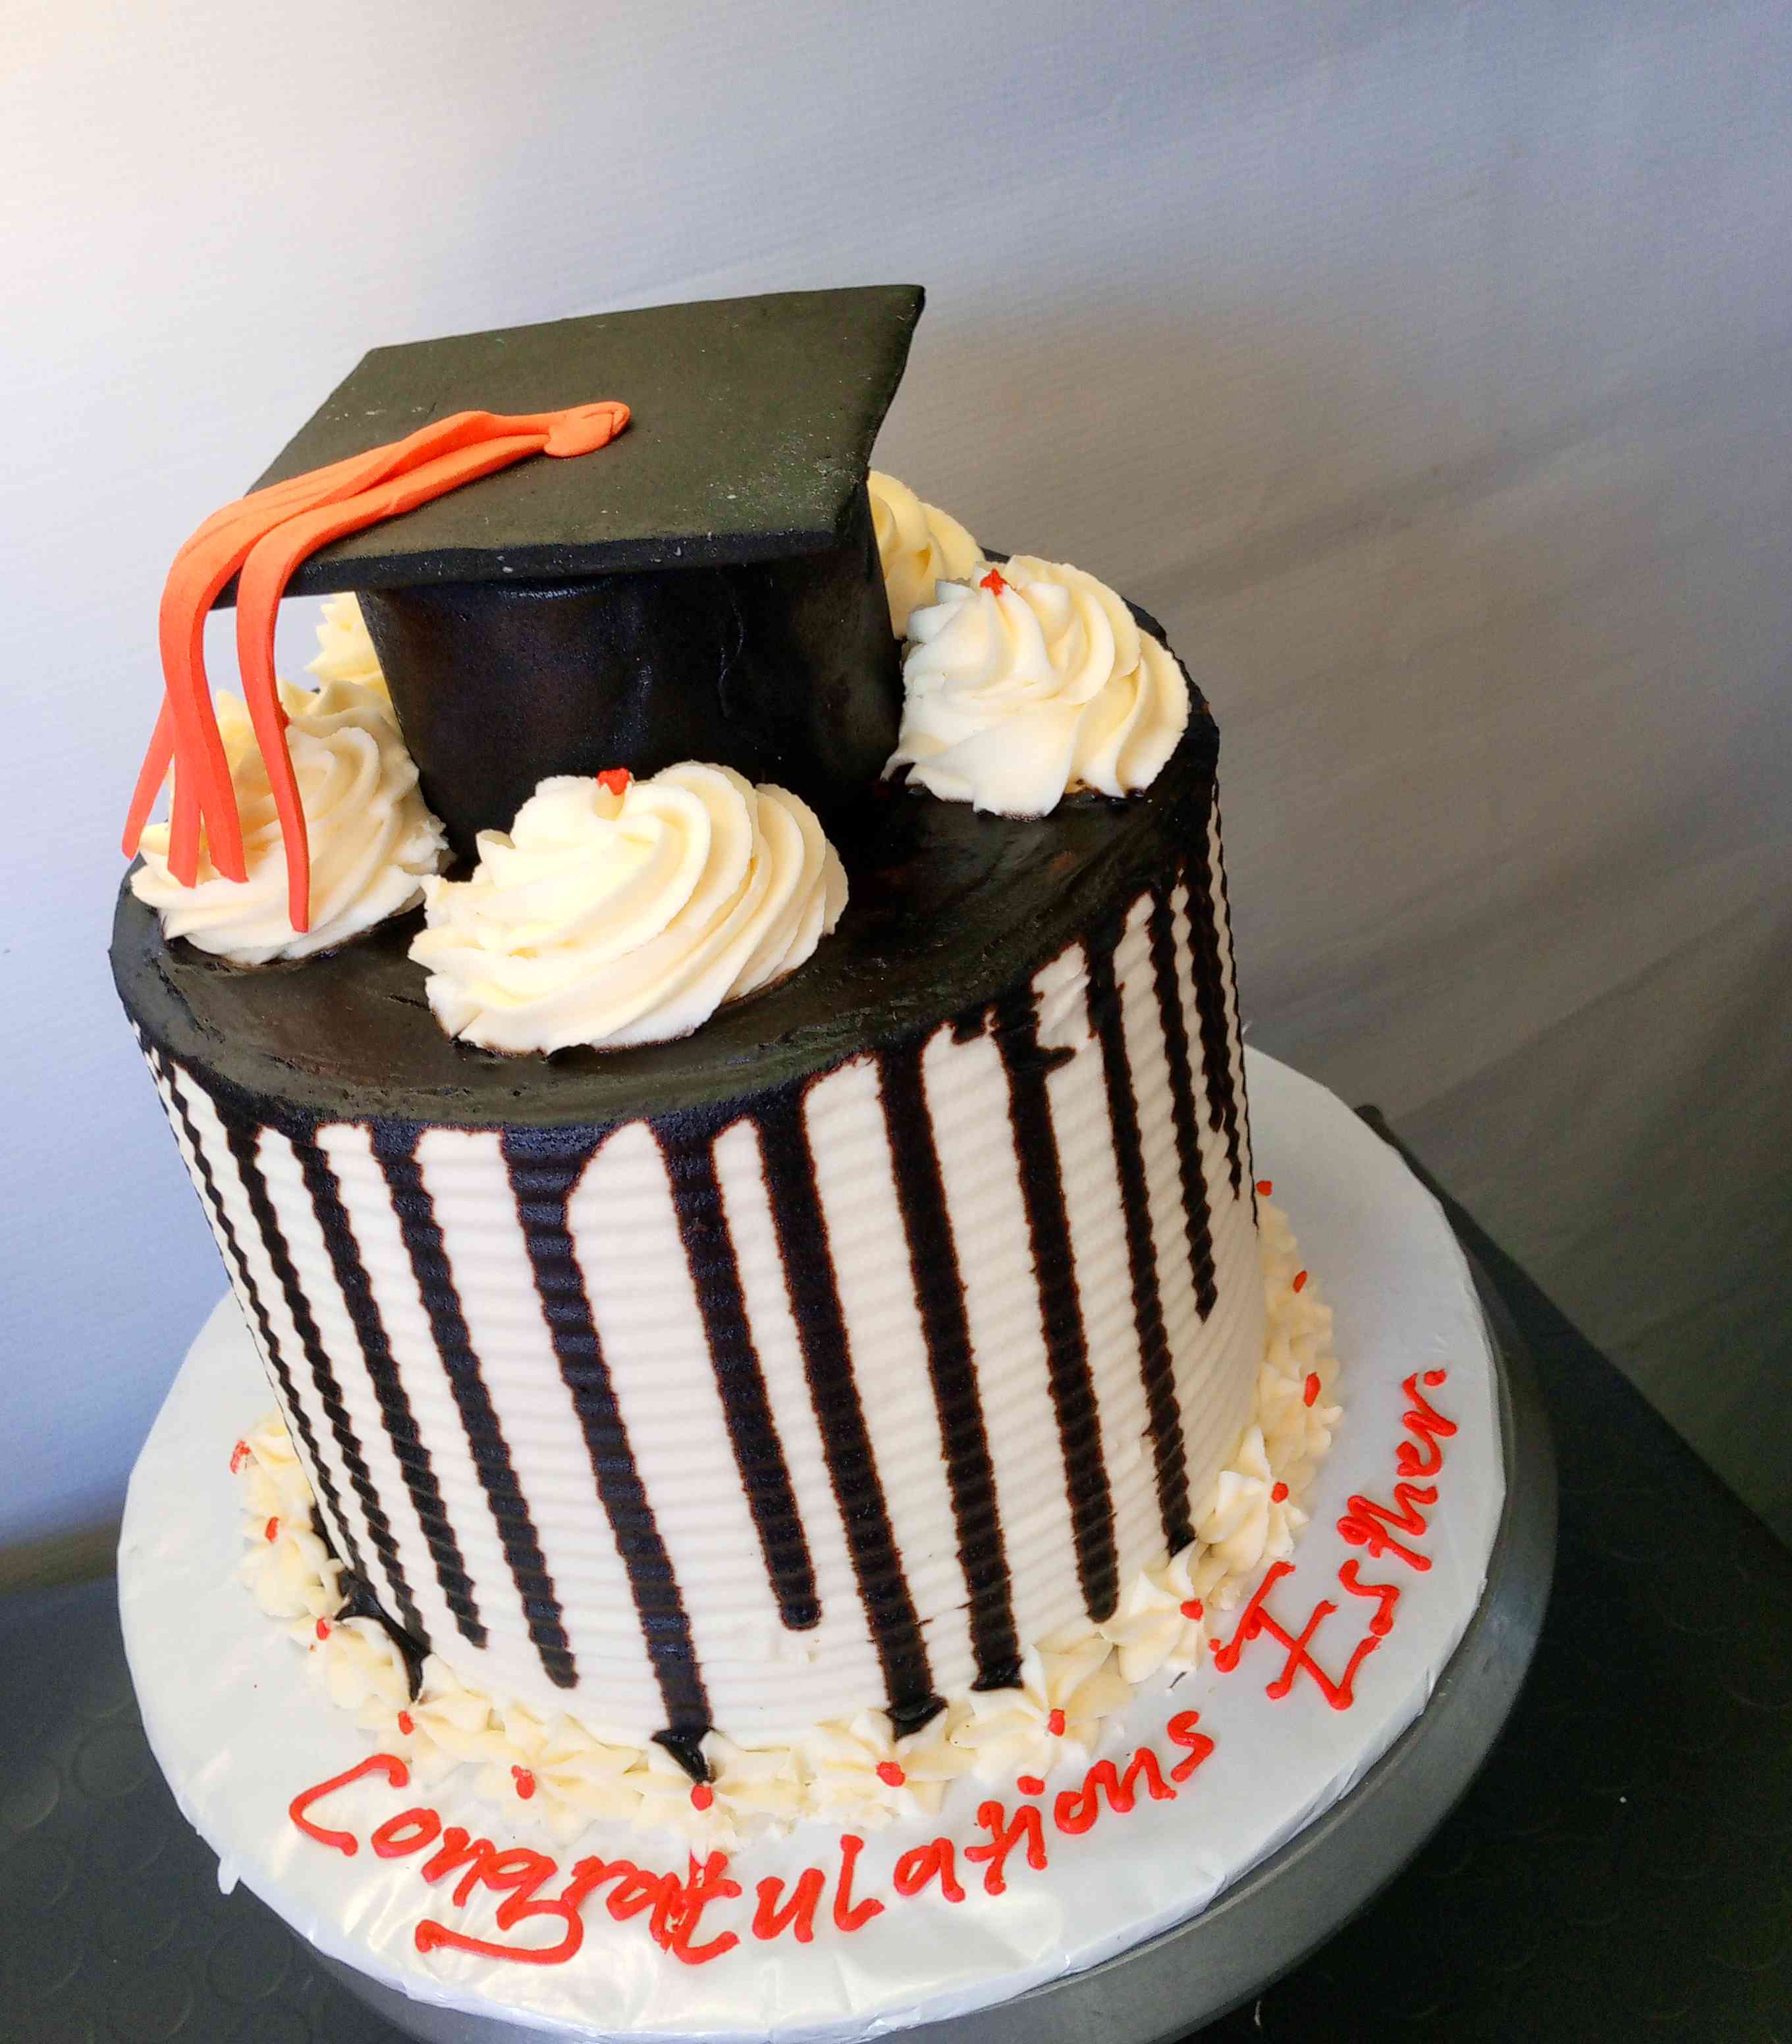 GRADUATION CAKE WITH DRIPPINGS..V